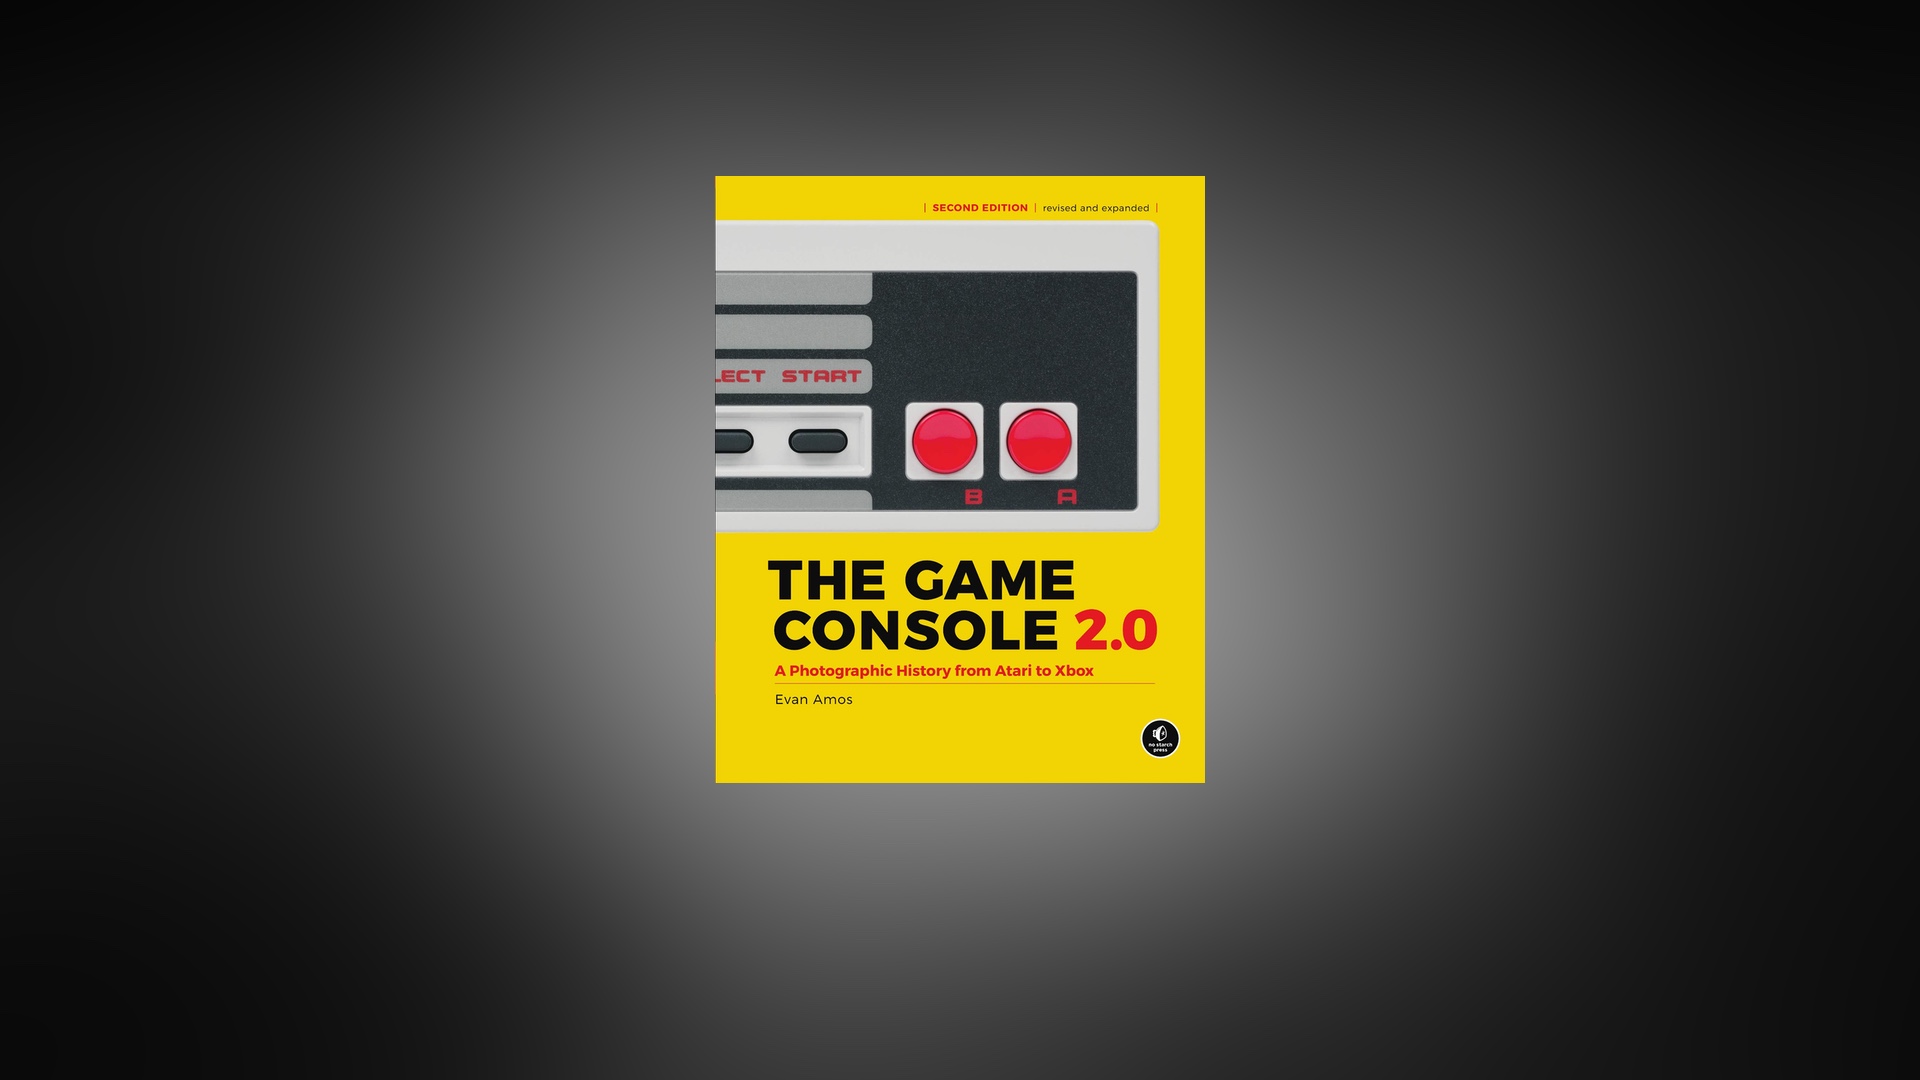 The Game Console 2.0 review